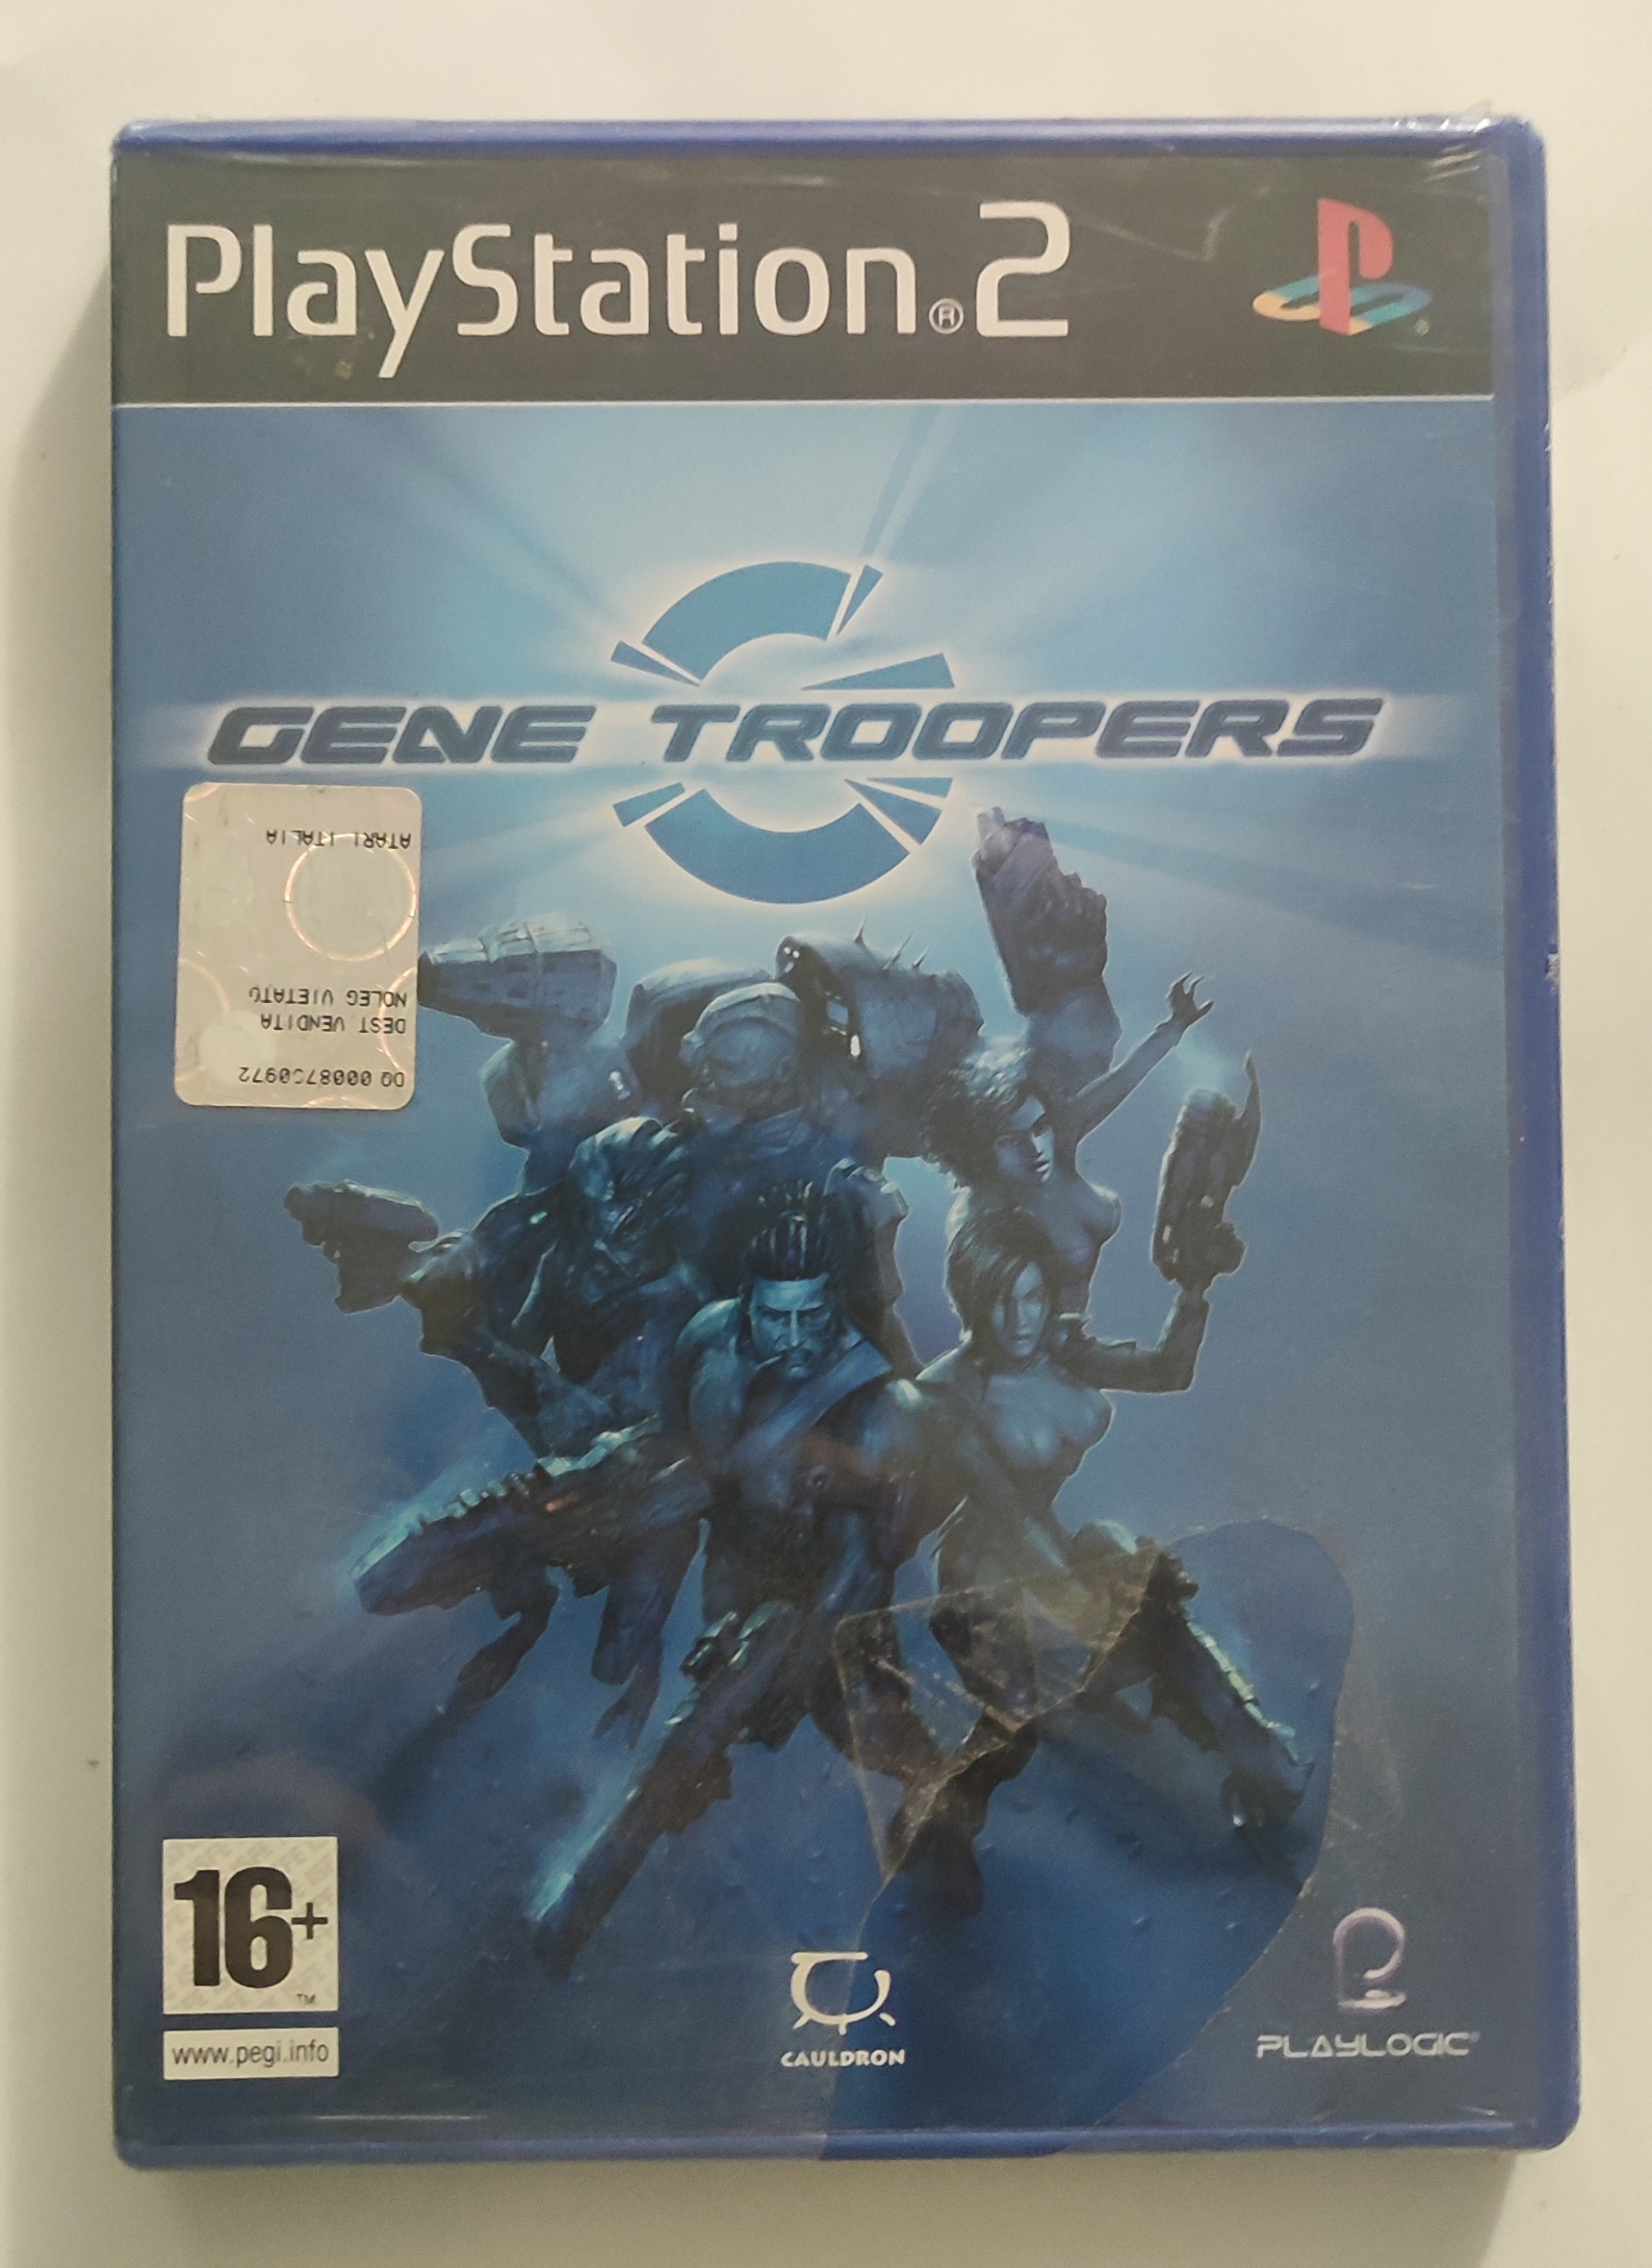 Playstation 2 PS2 - Gene Troopers - Sealed LL.